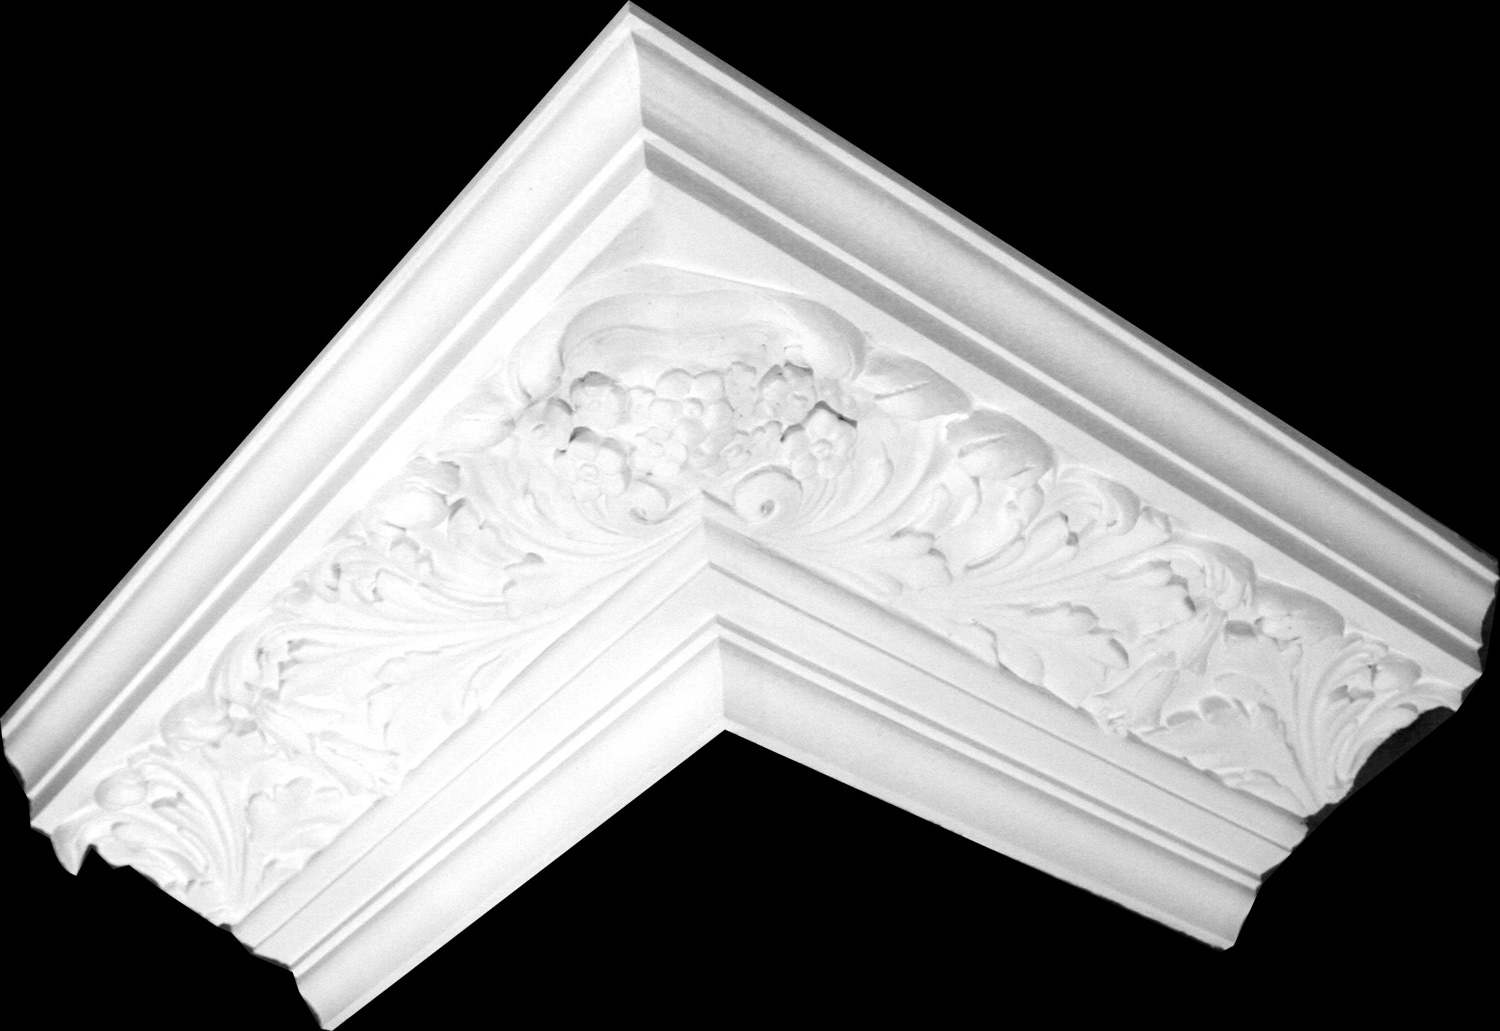 Reference: 166 - Style: Decorative<br />Girth Ceiling (mm): 285<br />Girth Wall (mm): 160